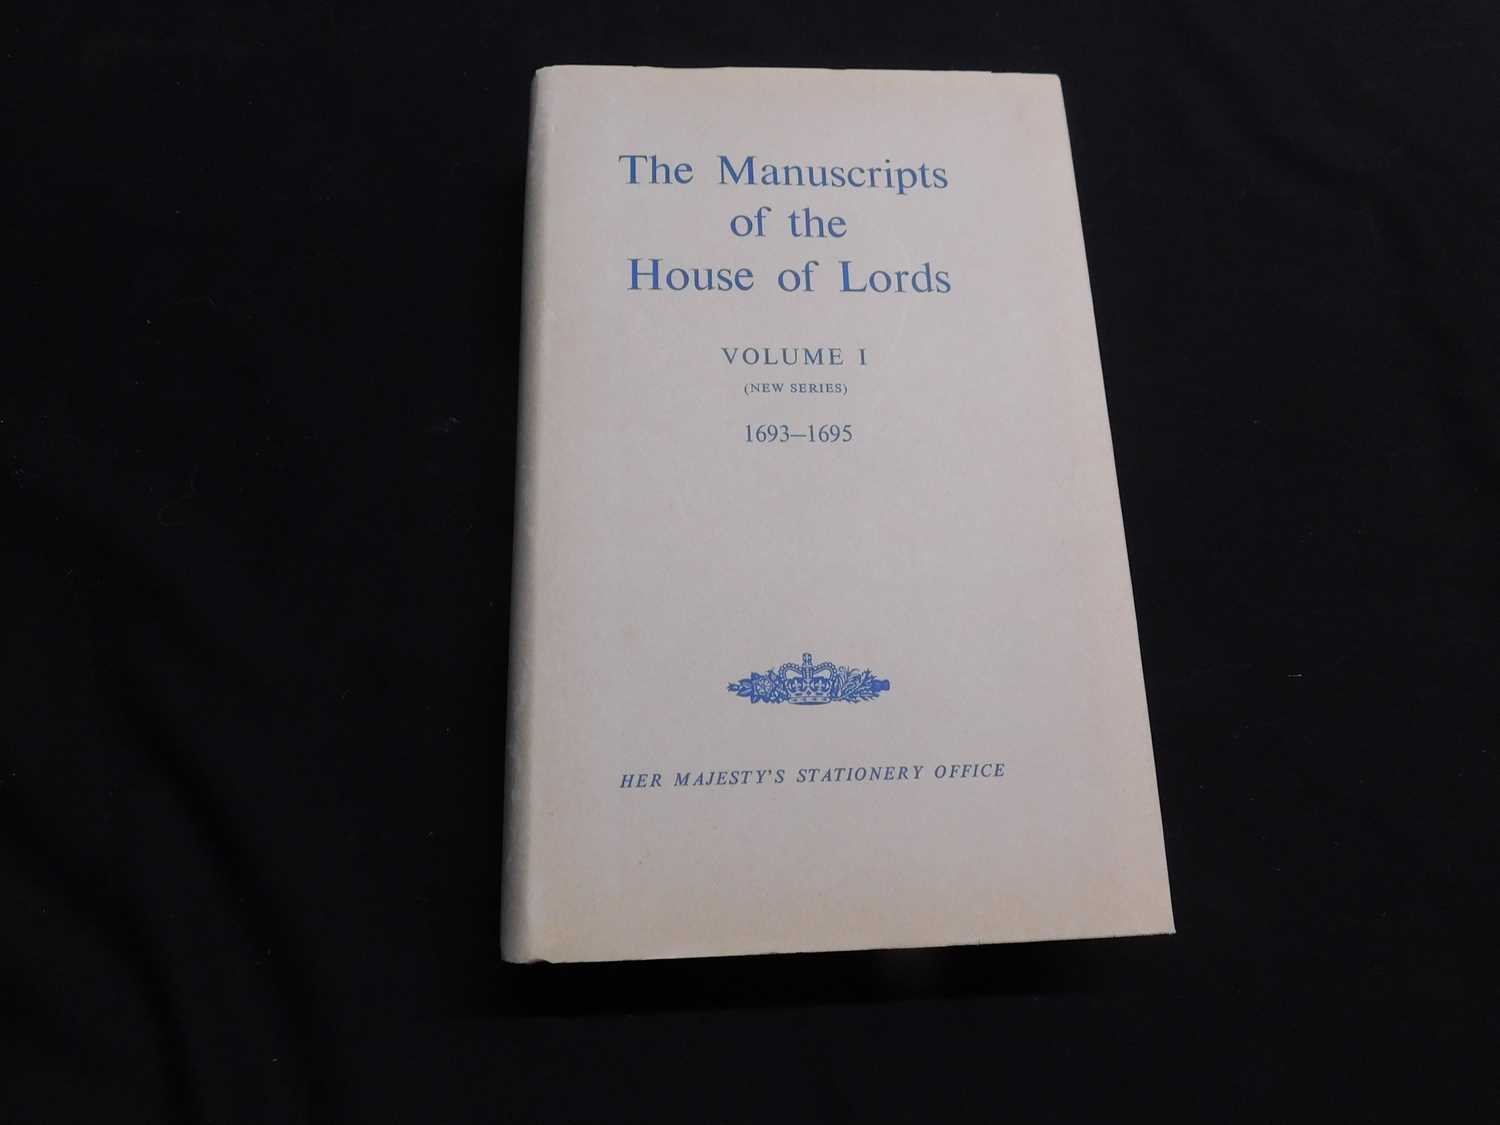 THE MANUSCRIPTS OF THE HOUSE OF LORDS: London, HMSO 1964-66, 8 vols, new series, original cloth, d/w